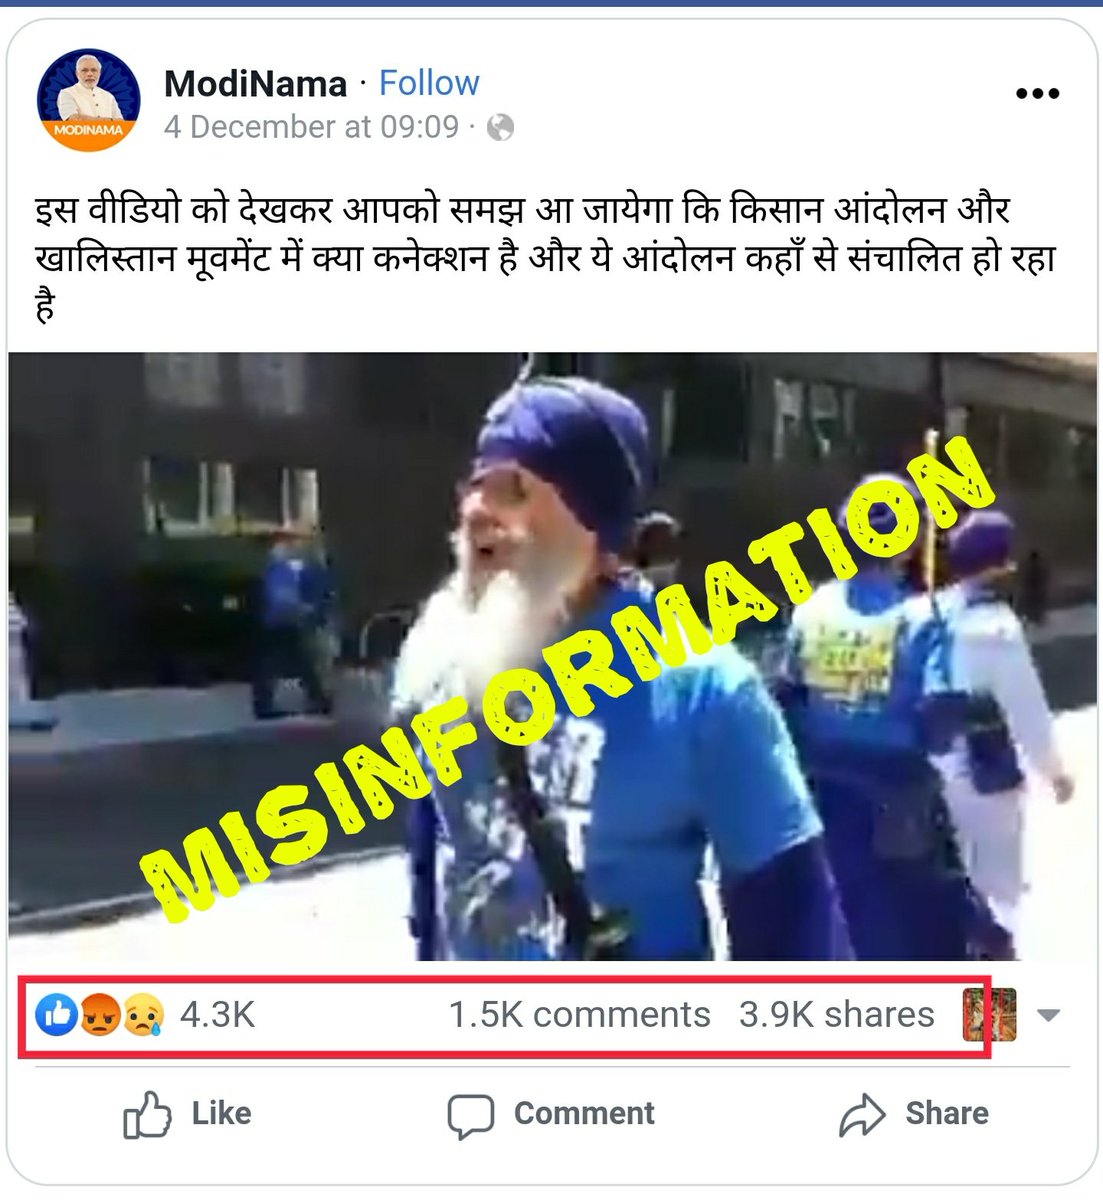 An old video of a pro-Khalistan rally held in San Francisco, US is widely circulating on social media. It has been falsely linked with the ongoing farmers' protest.  #AltNewsFactCheck 13/n  https://www.altnews.in/old-video-of-pro-khalistan-rally-in-us-linked-with-farmers-protest/?utm_source=website&utm_medium=social-media&utm_campaign=newpost